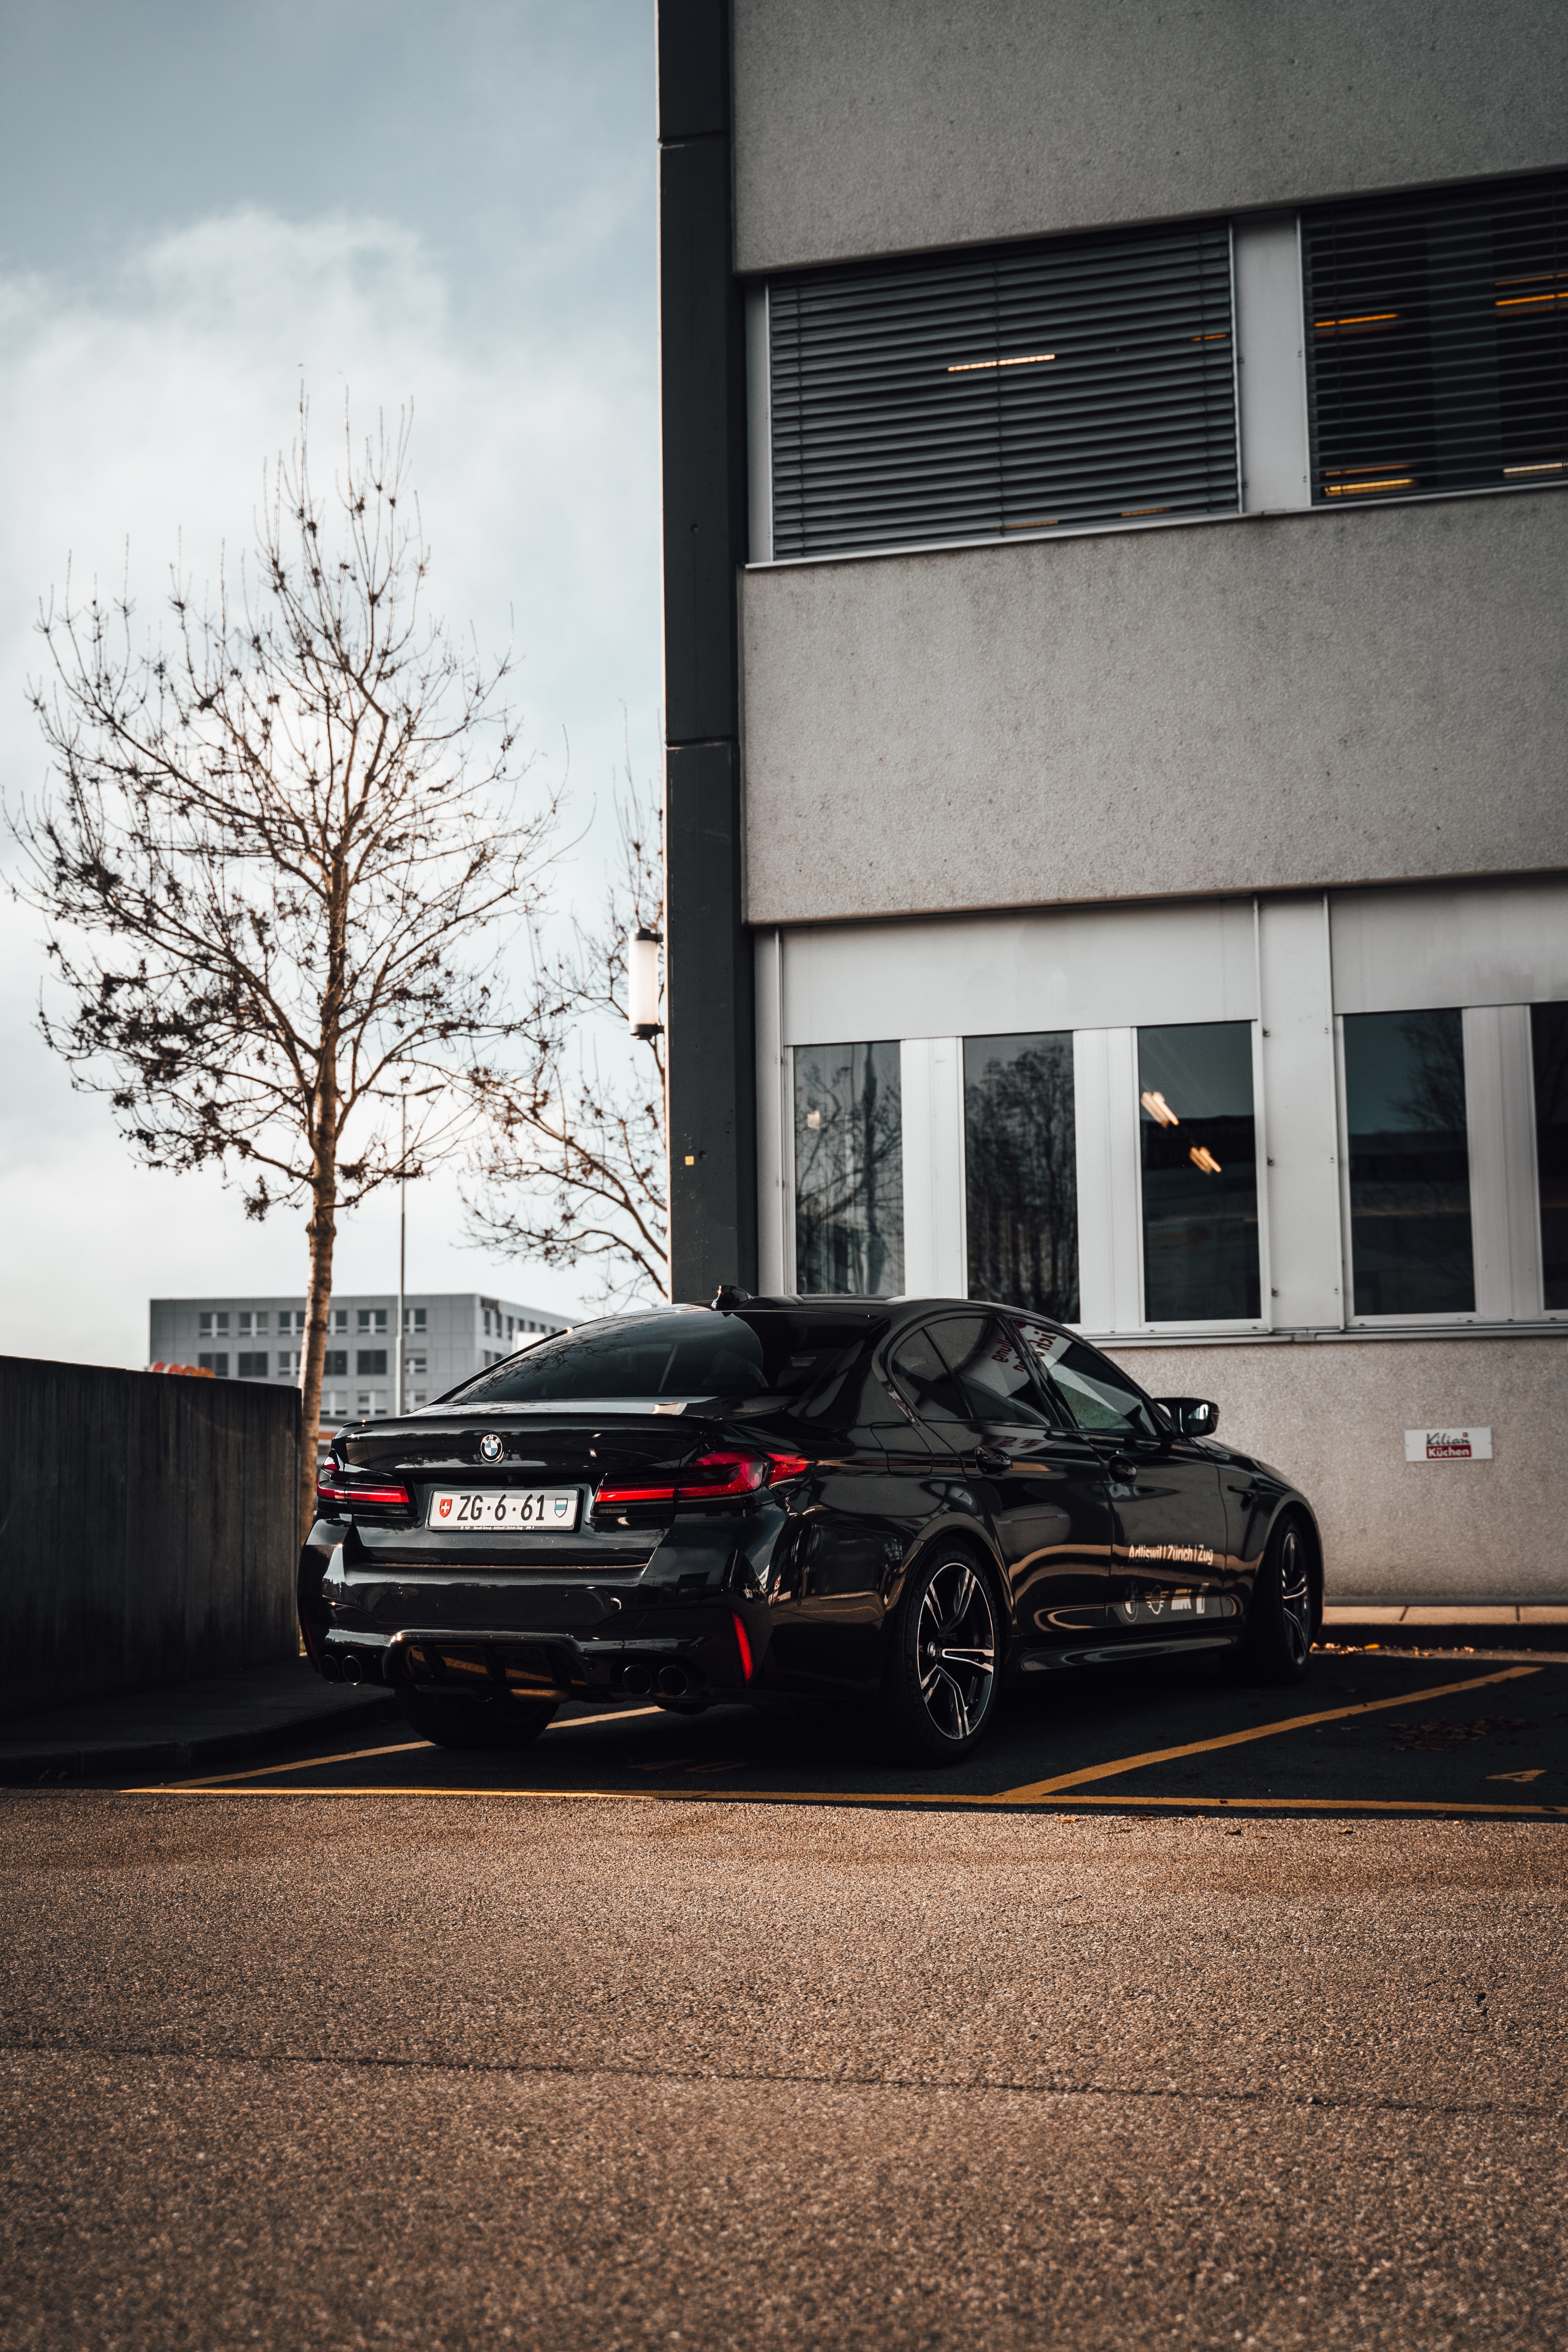 bmw, cars, black, car, side view, parking Aesthetic wallpaper